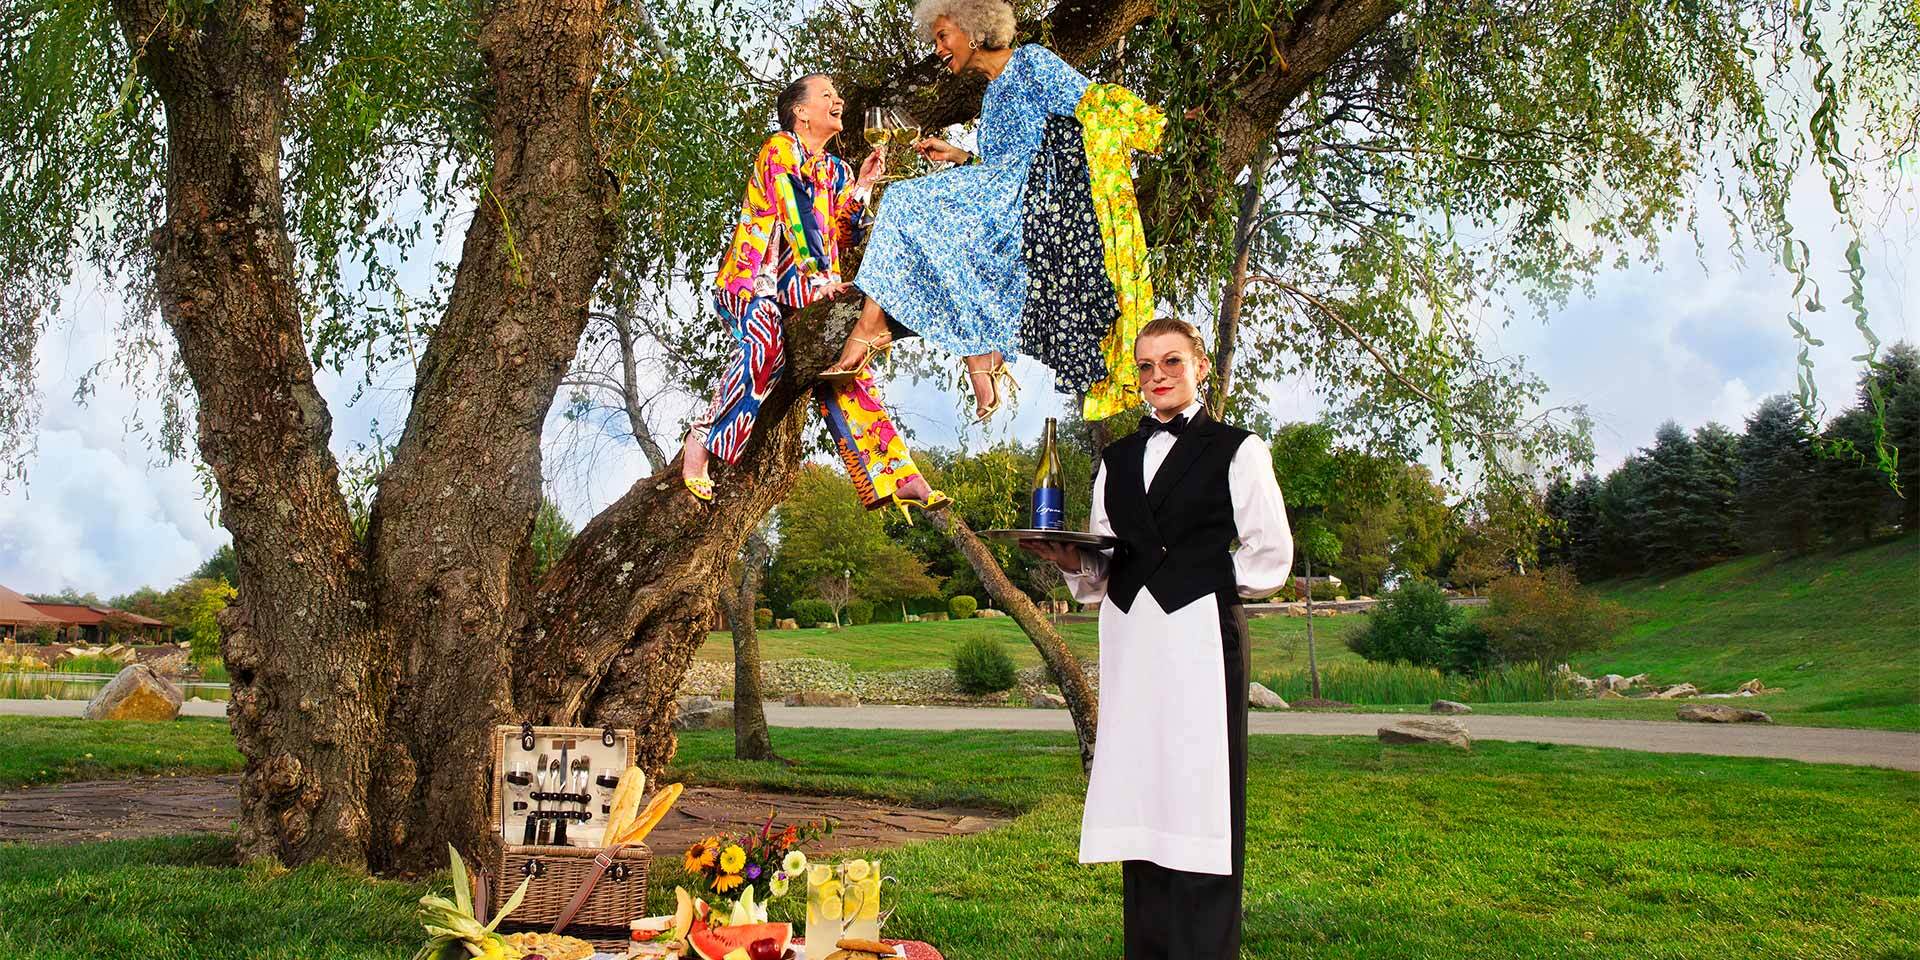 Two older women sit in a tree and enjoy a picnic on the ground catered to them by a woman standing in front of them with champagne in hand.